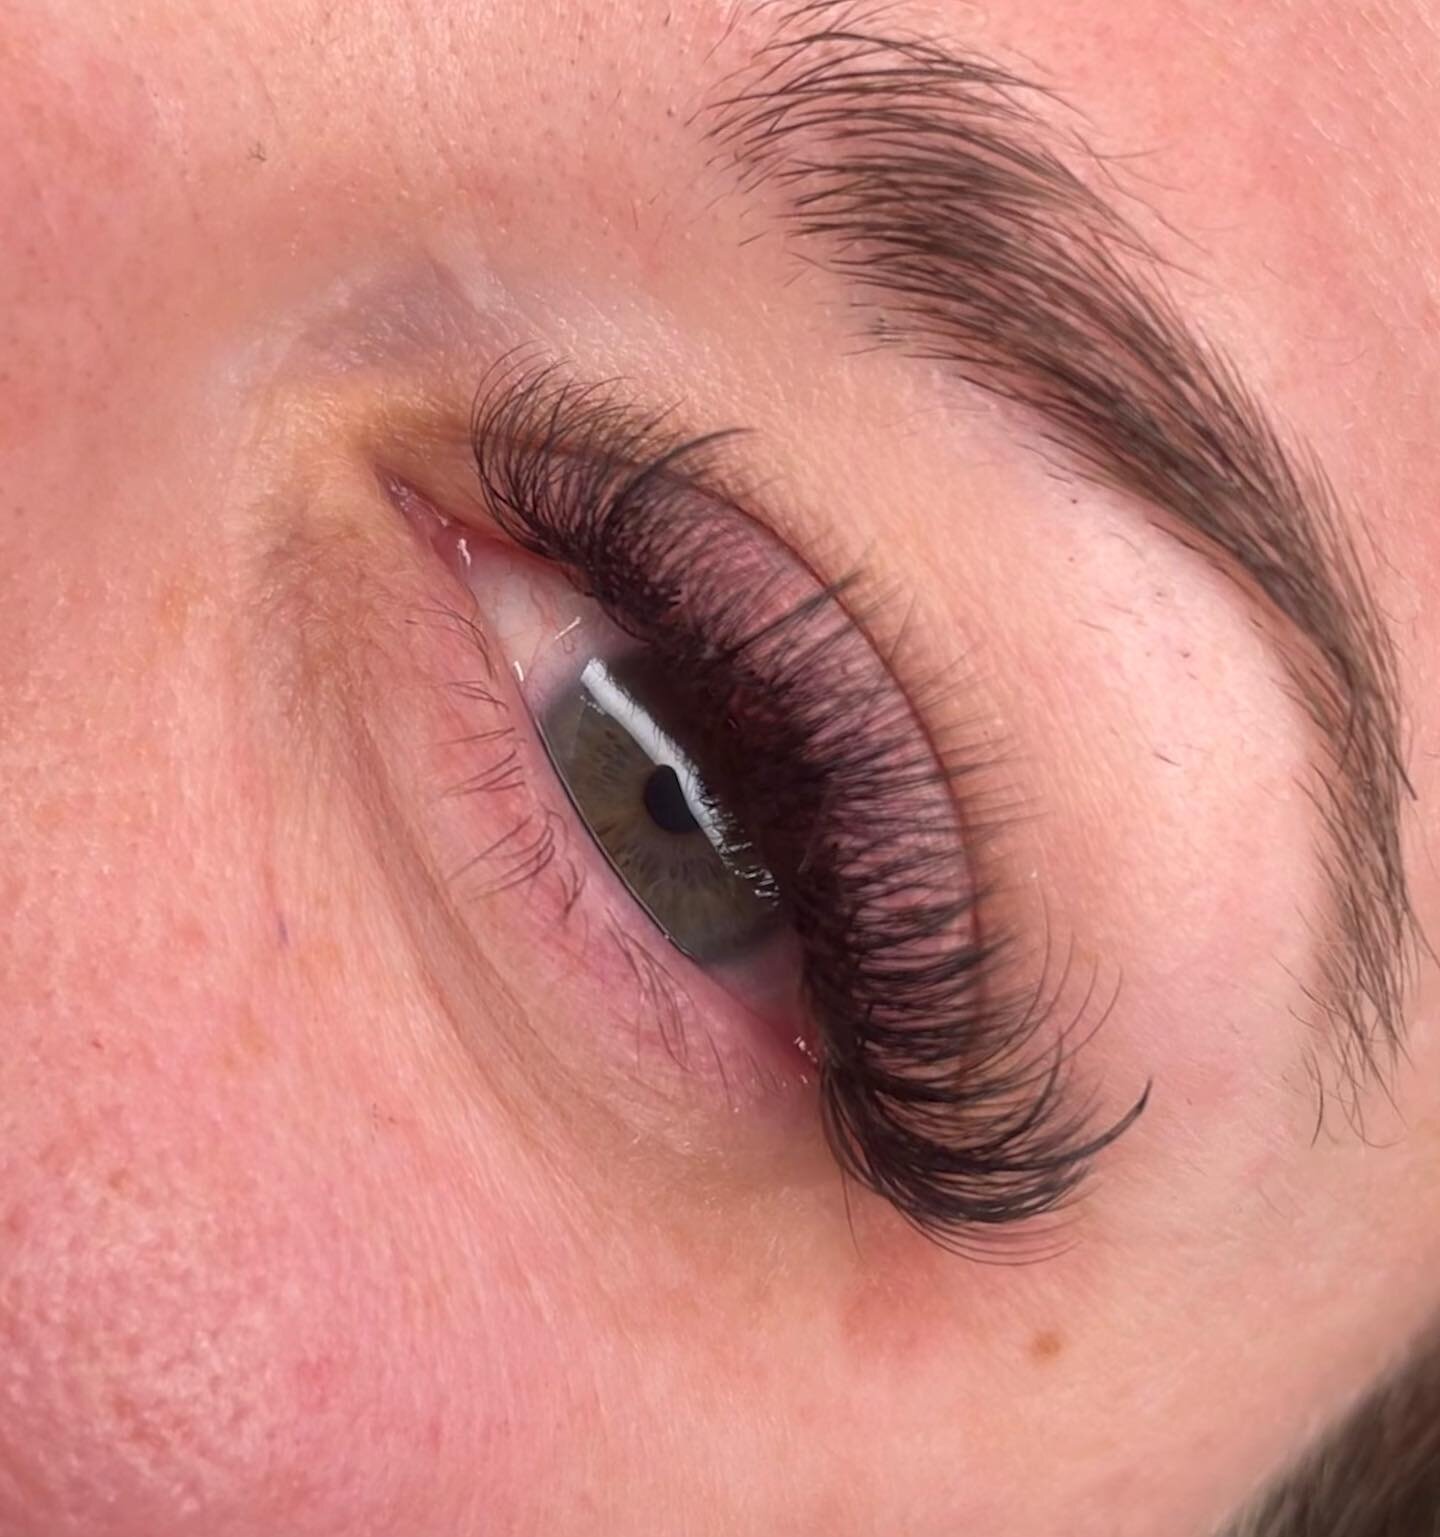 Just a HINT of spikes this fresh full set of hybrids - Swipe to see how we started!

Spikes by @parislashacademy 
Lashes by ME @mainecosmeticcompany 

#mainelashes #mainelashgirl #portlandmainelashes #lashextensionsmaine #lashartistmaine #mainelashar